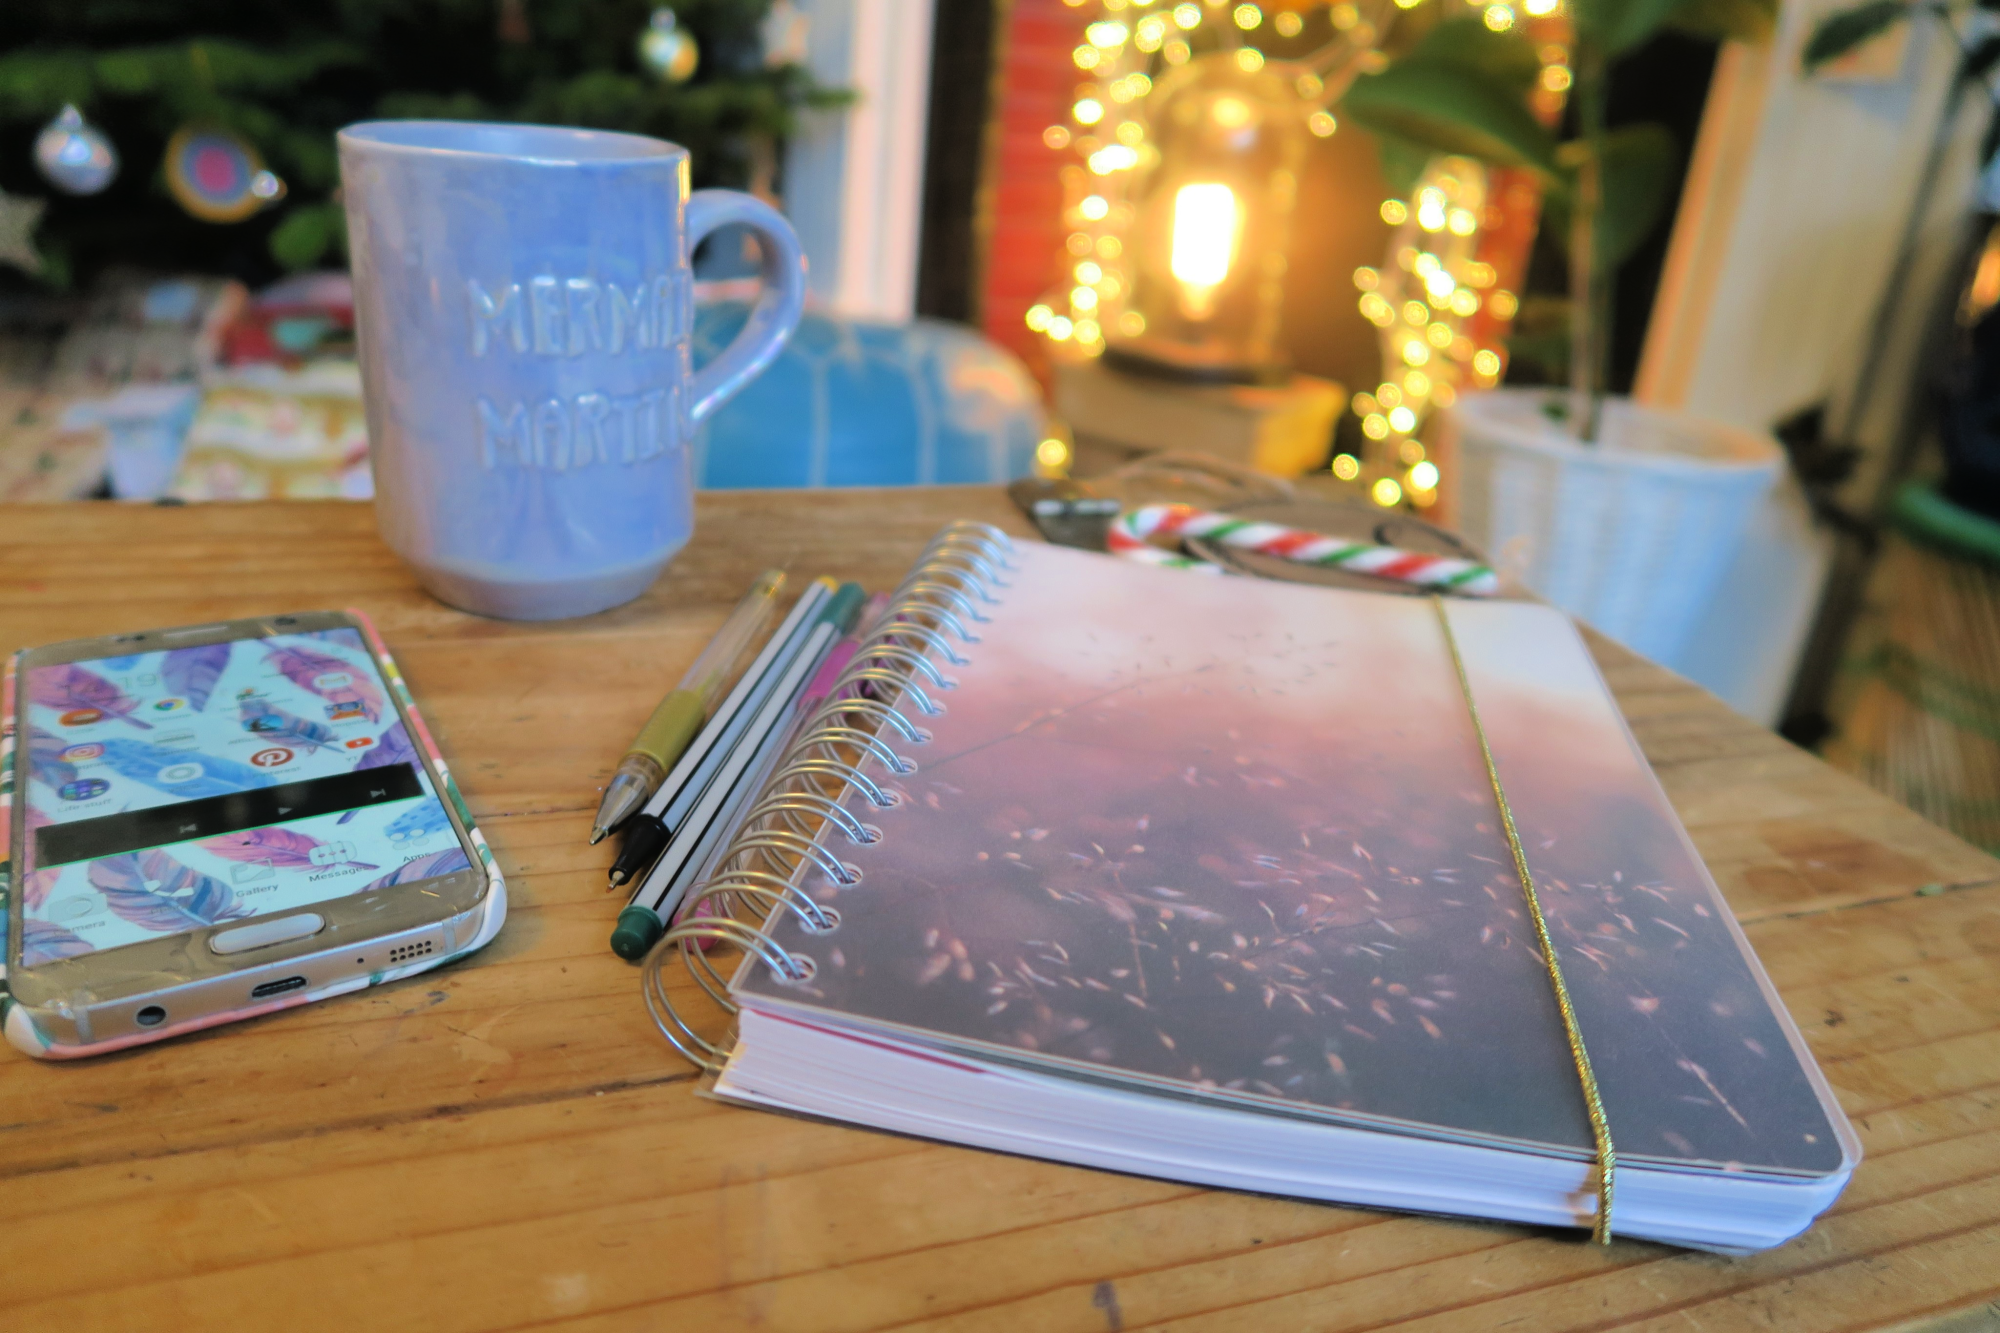 Getting ready for 2019 with Personal Planner